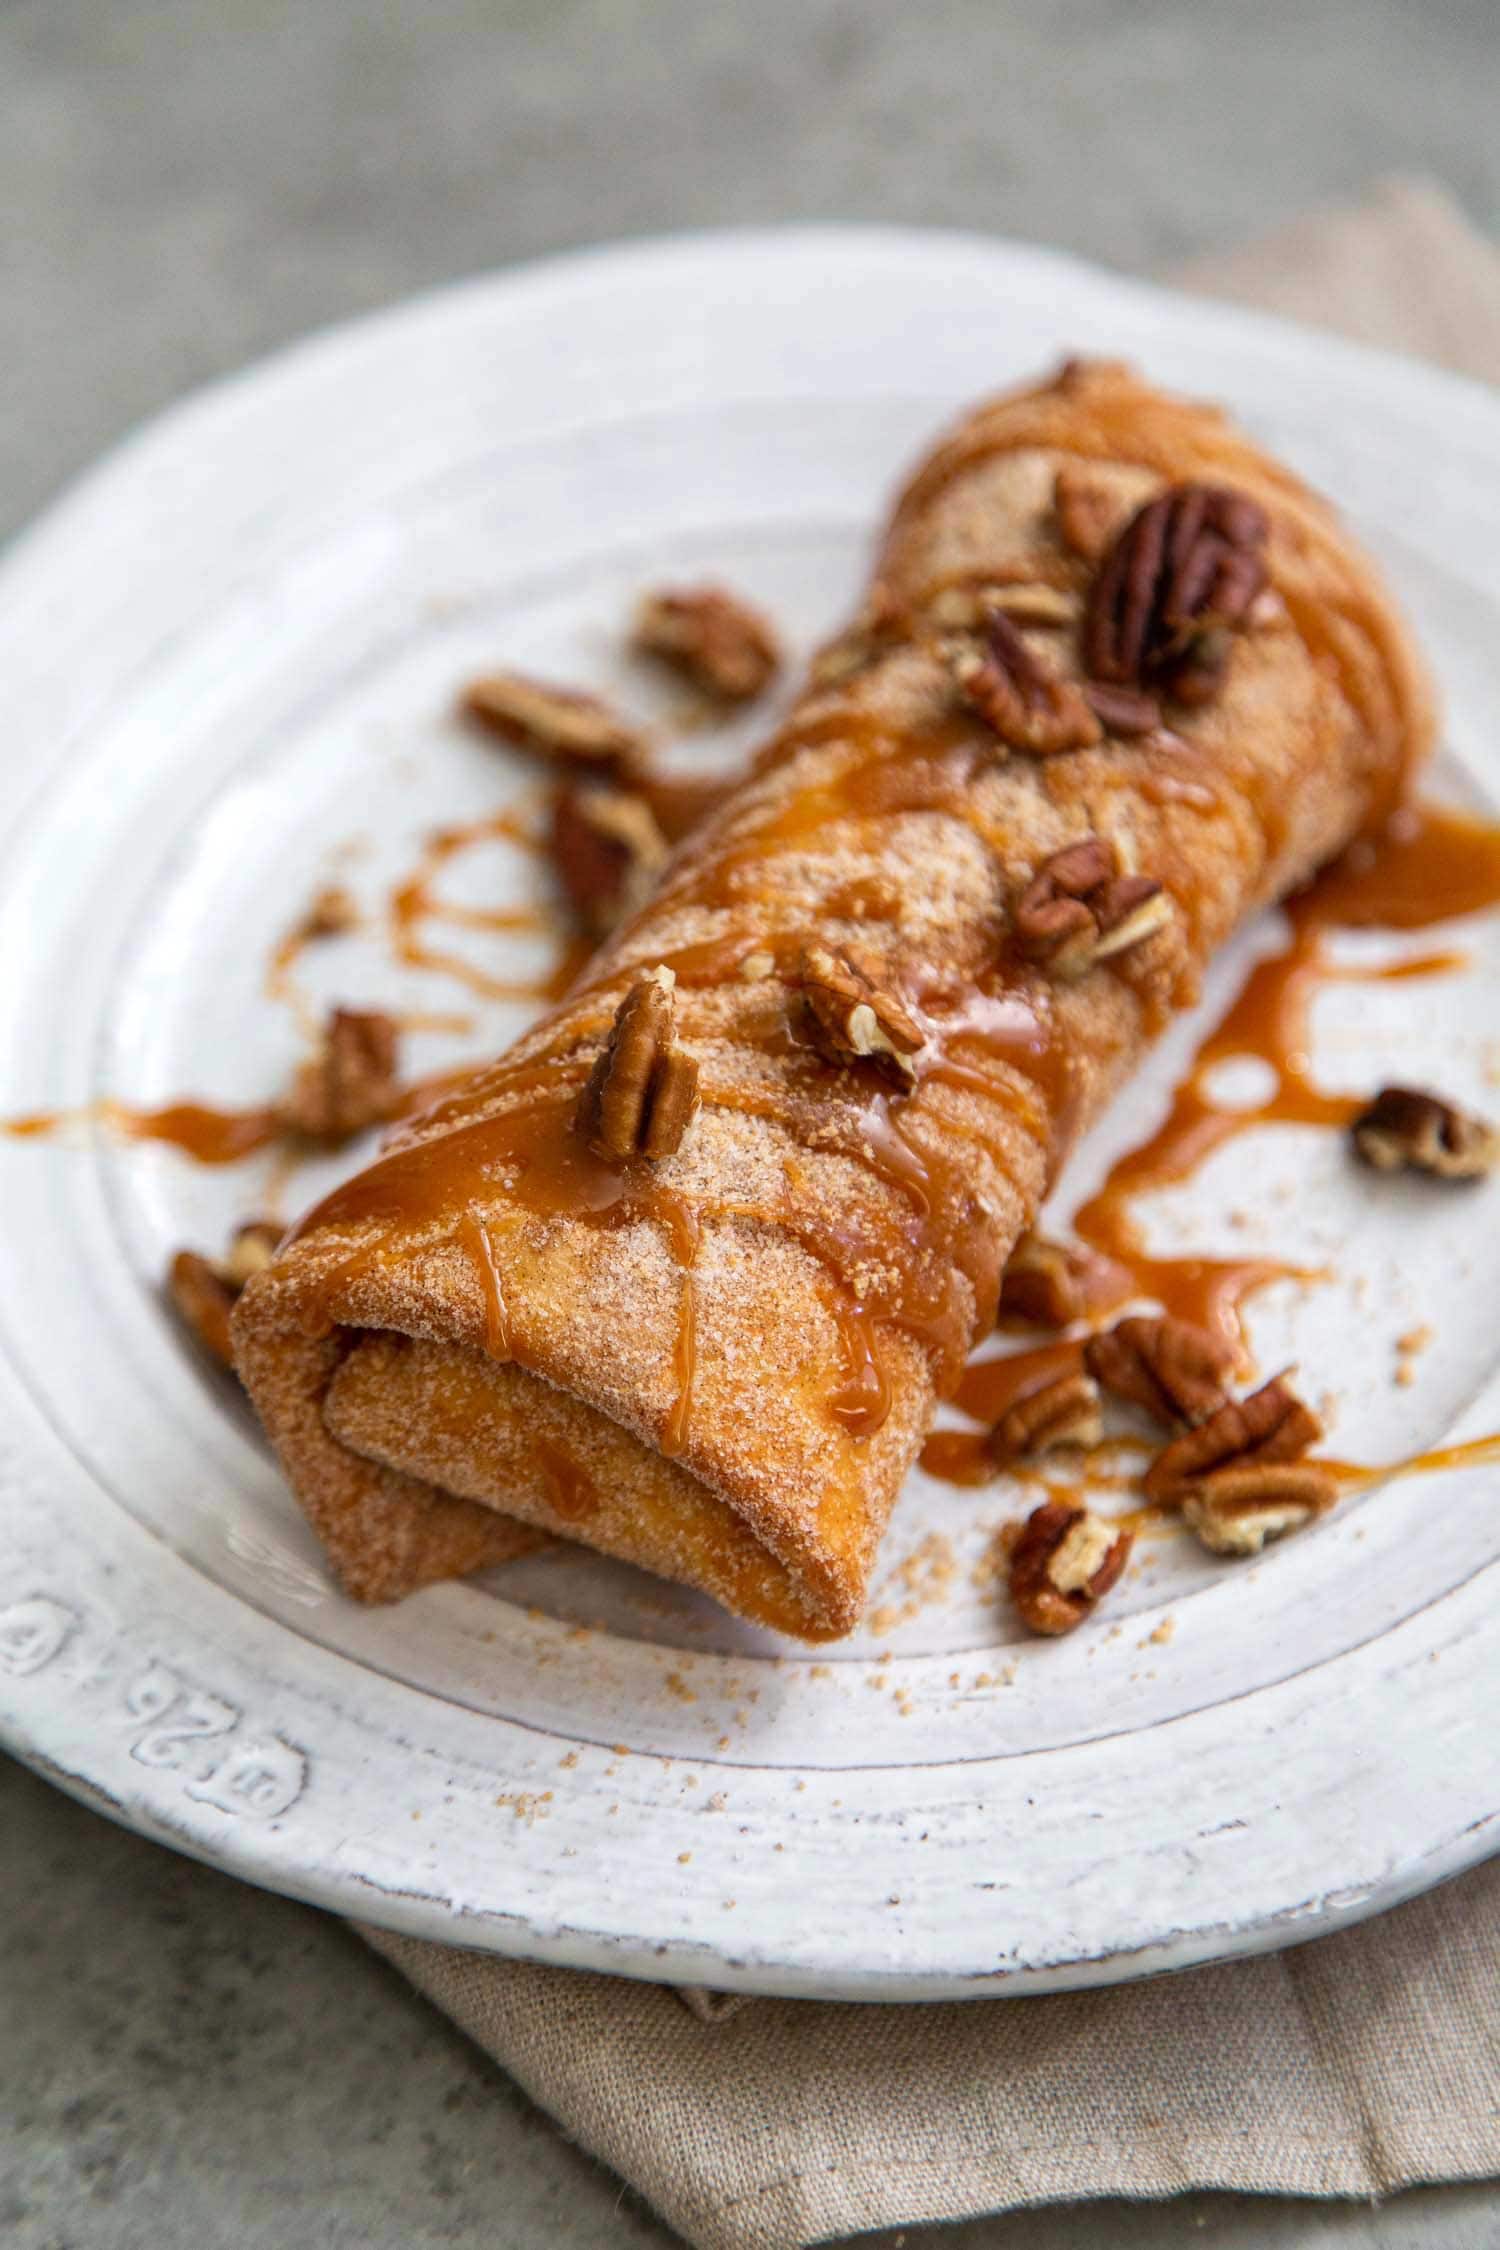 Pineapple Cheesecake Chimichangas. Crispy fried burritos filled with vanilla cream cheese and cinnamon spiced pineapple chunks. The dessert chimichangas are tossed in a sweet graham cracker powder.